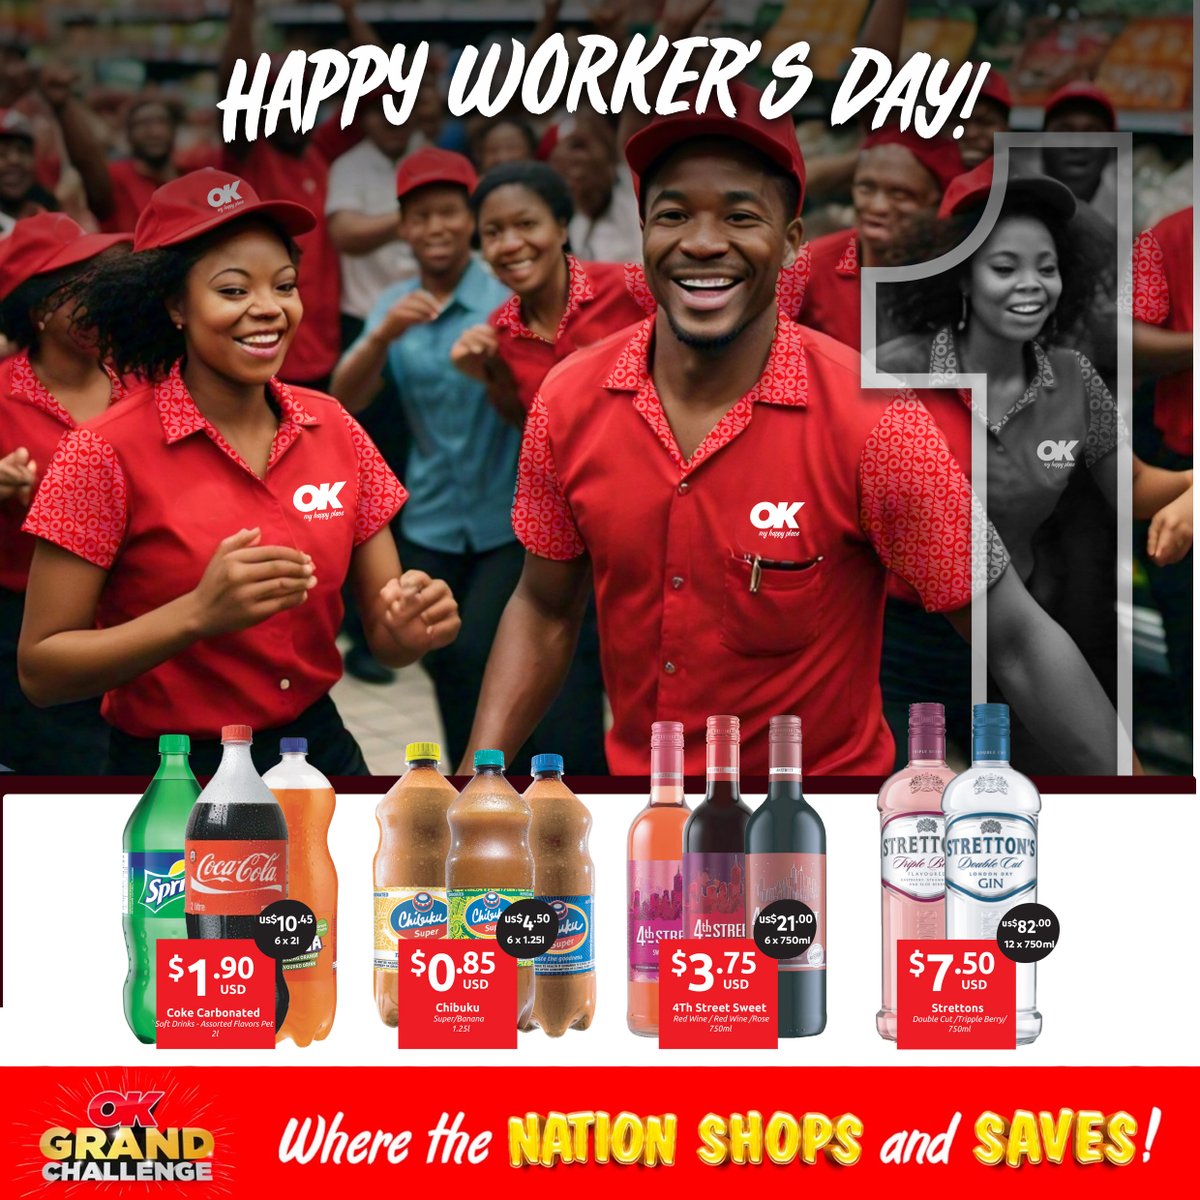 Celebrate May Day by treating yourself to a convenient shopping experience at OKMart. #HappyWorkersDay #OKGrandChallengePromotion #MyHappyPlace